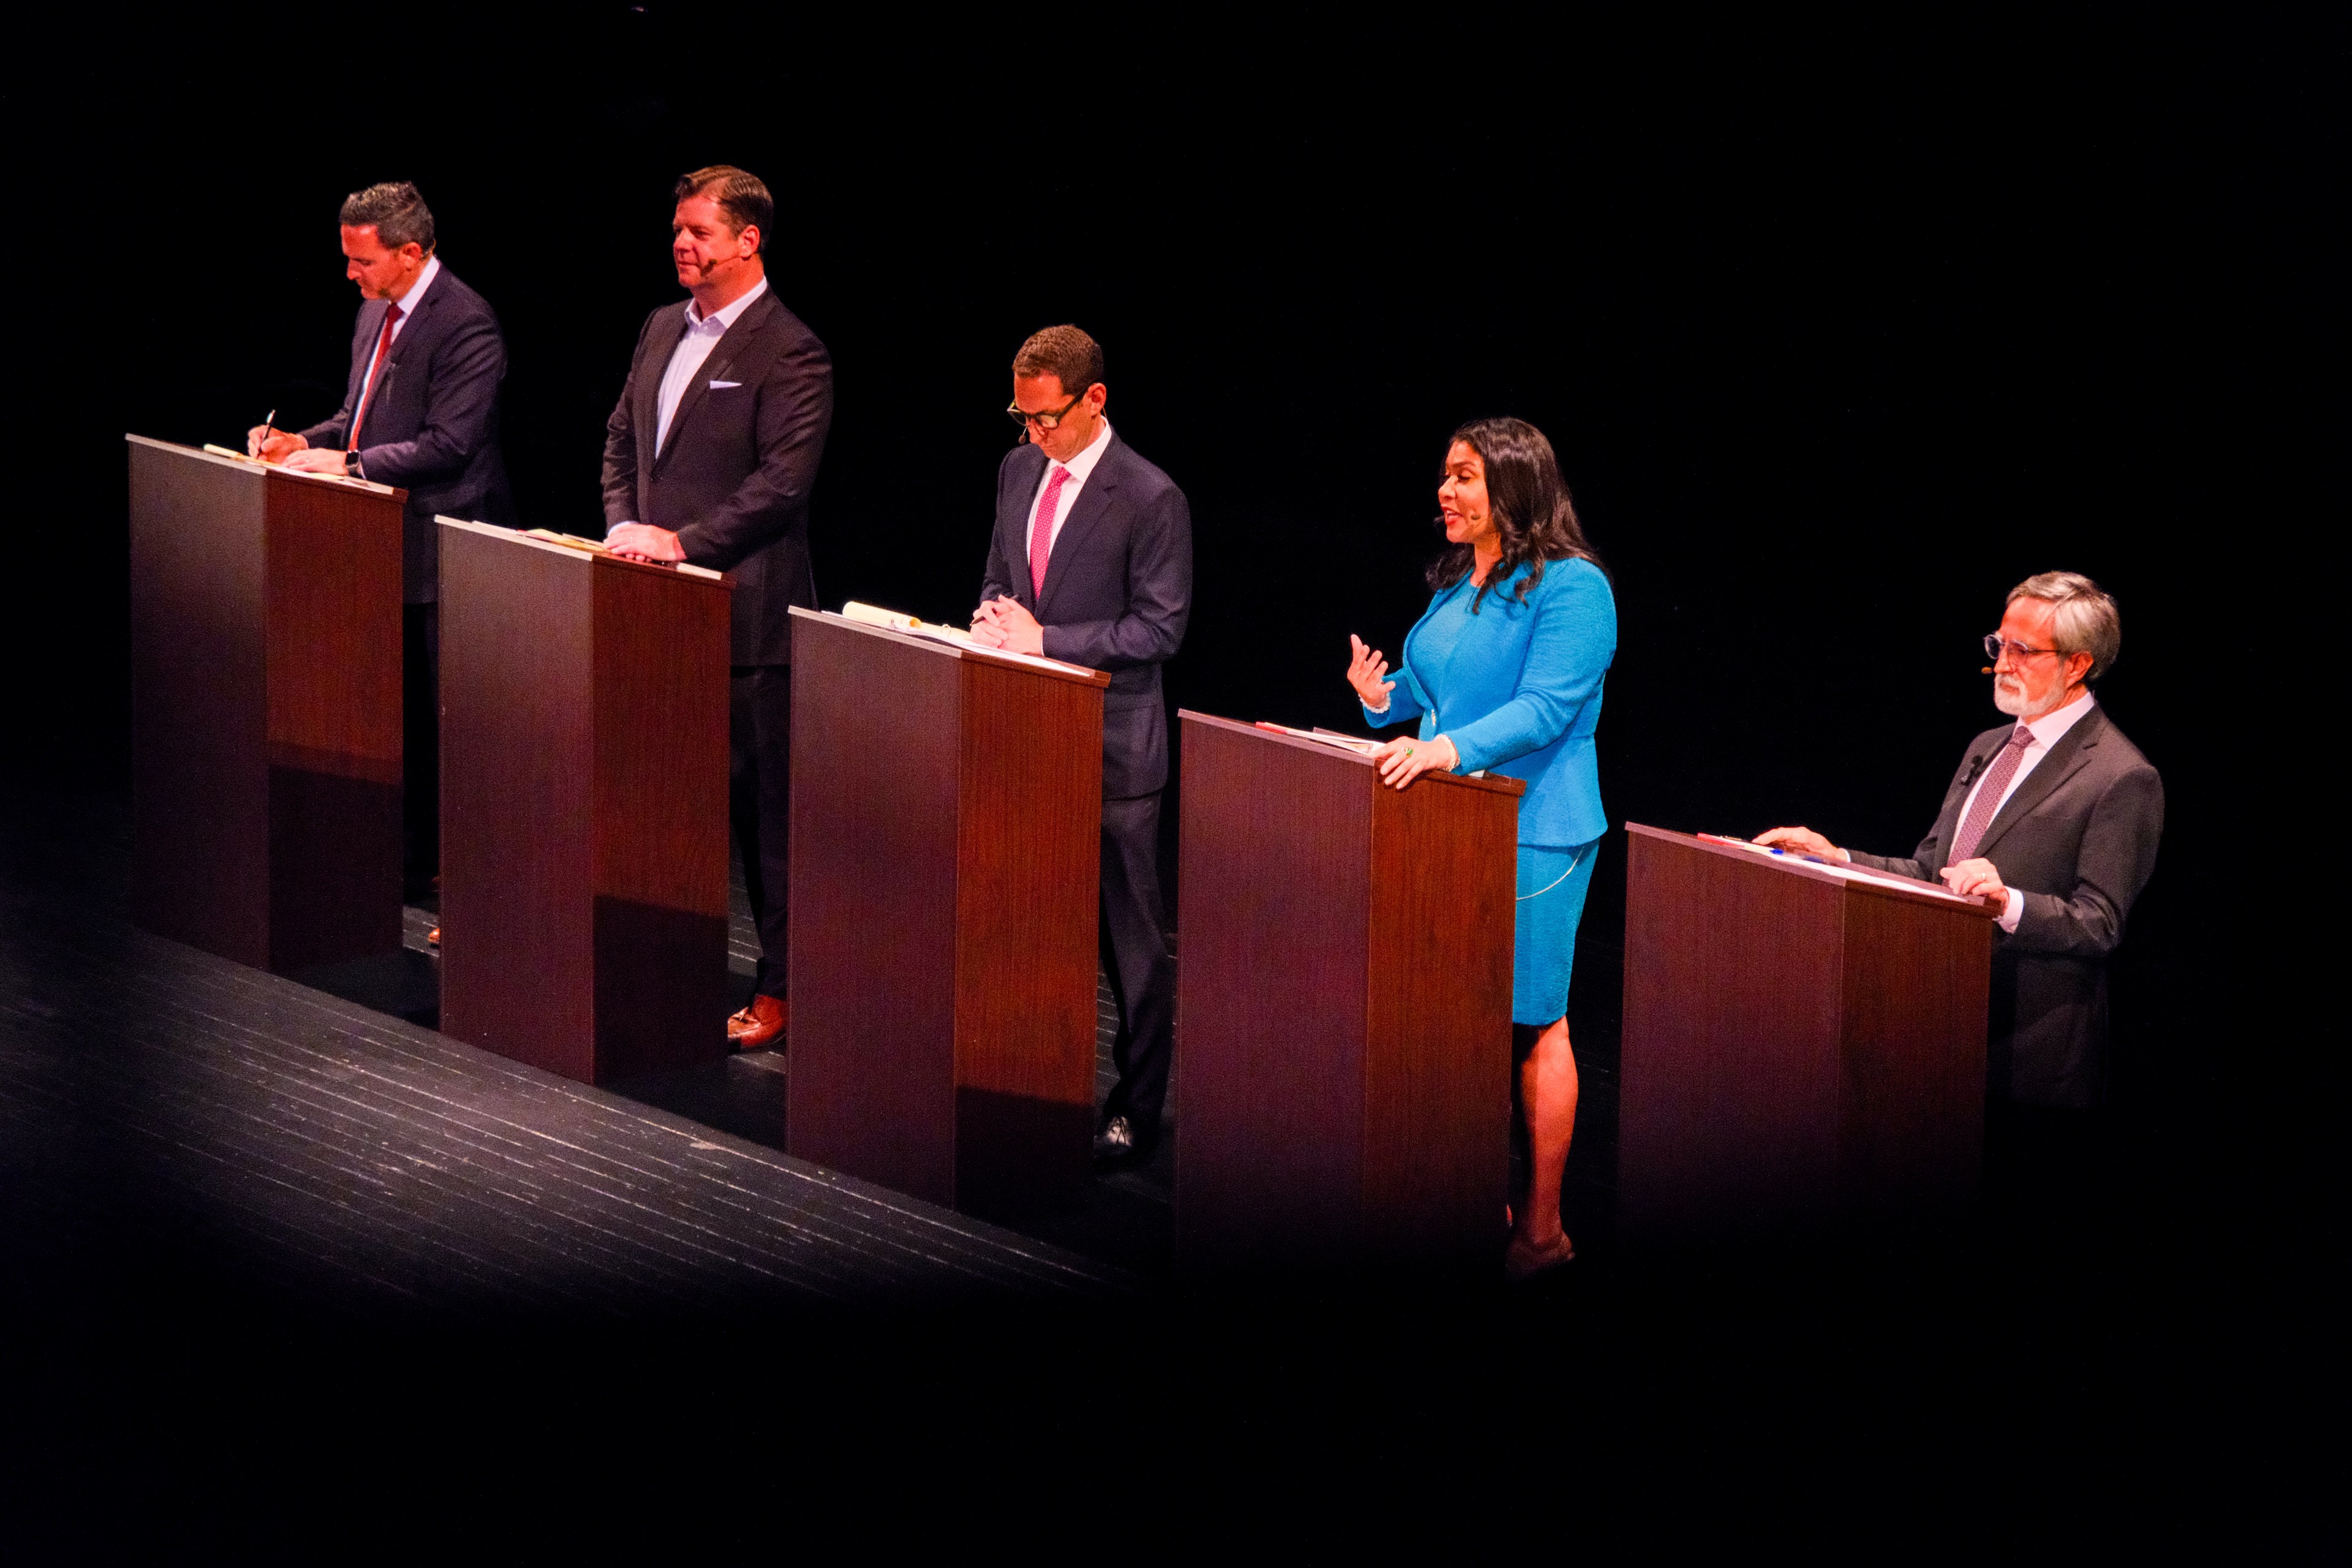 Five people stand behind podiums on a stage, participating in what appears to be a debate or panel discussion.